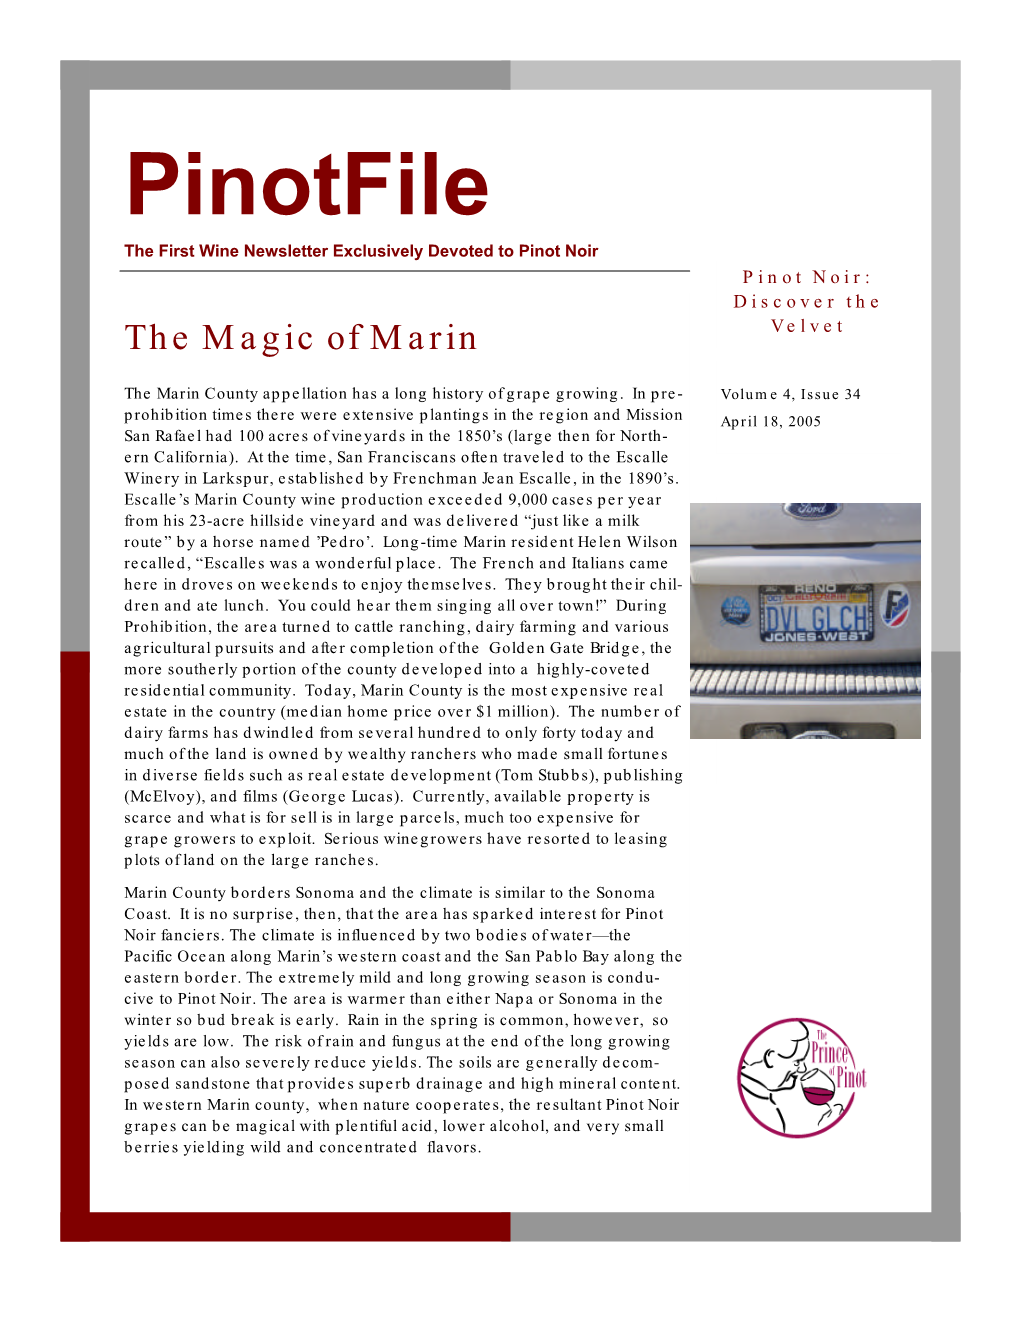 Pinotfile Vol 4, Issue 34